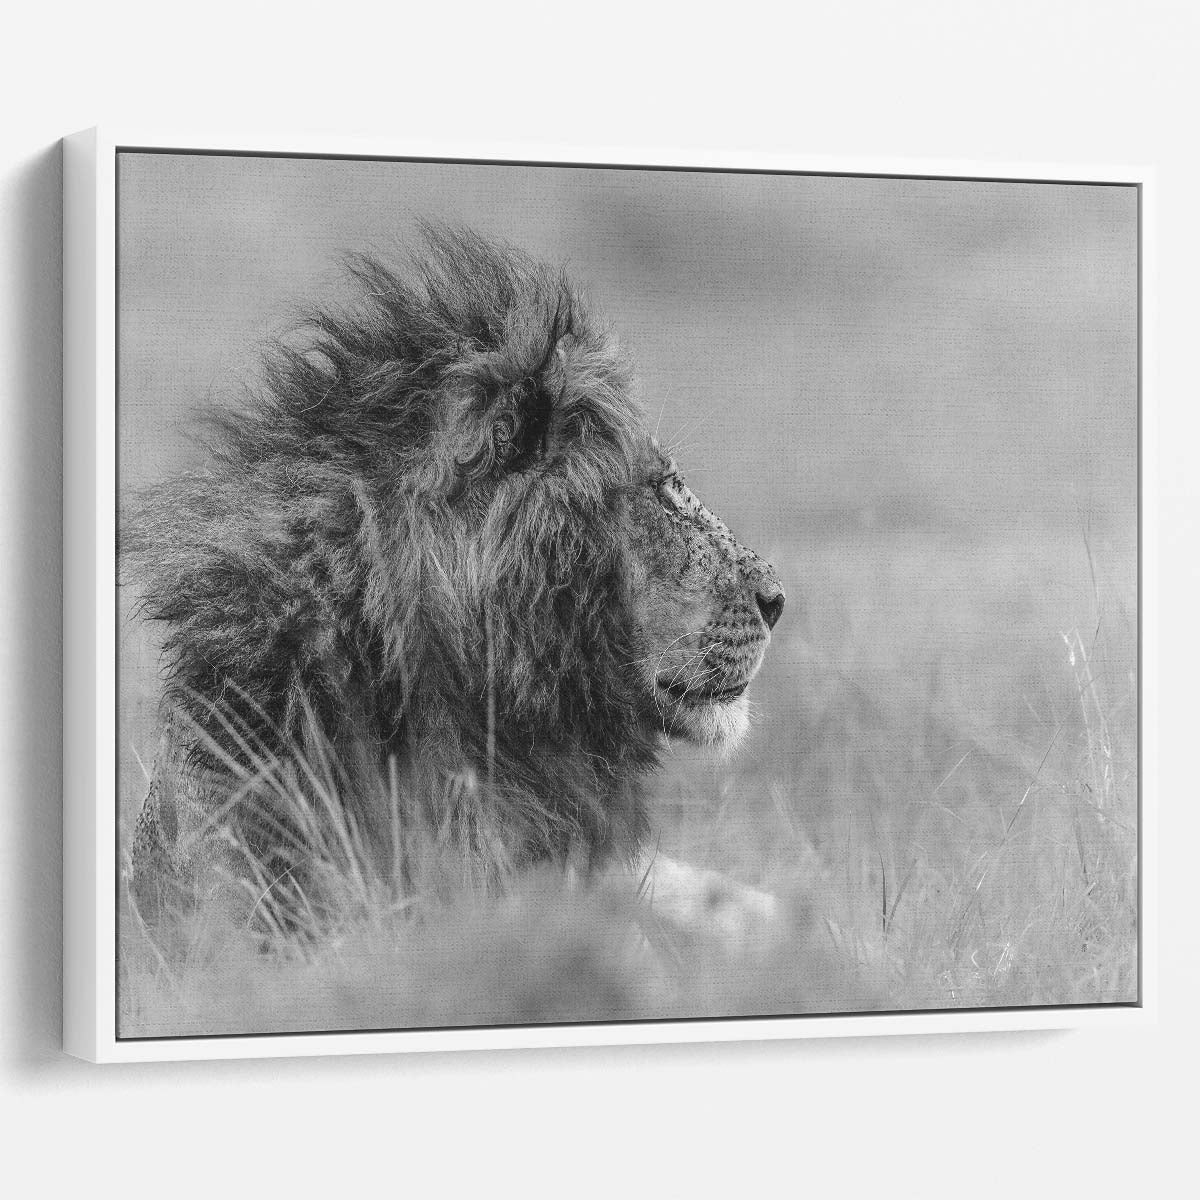 Majestic Solitary Lion in Serene Savannah Wall Art by Luxuriance Designs. Made in USA.